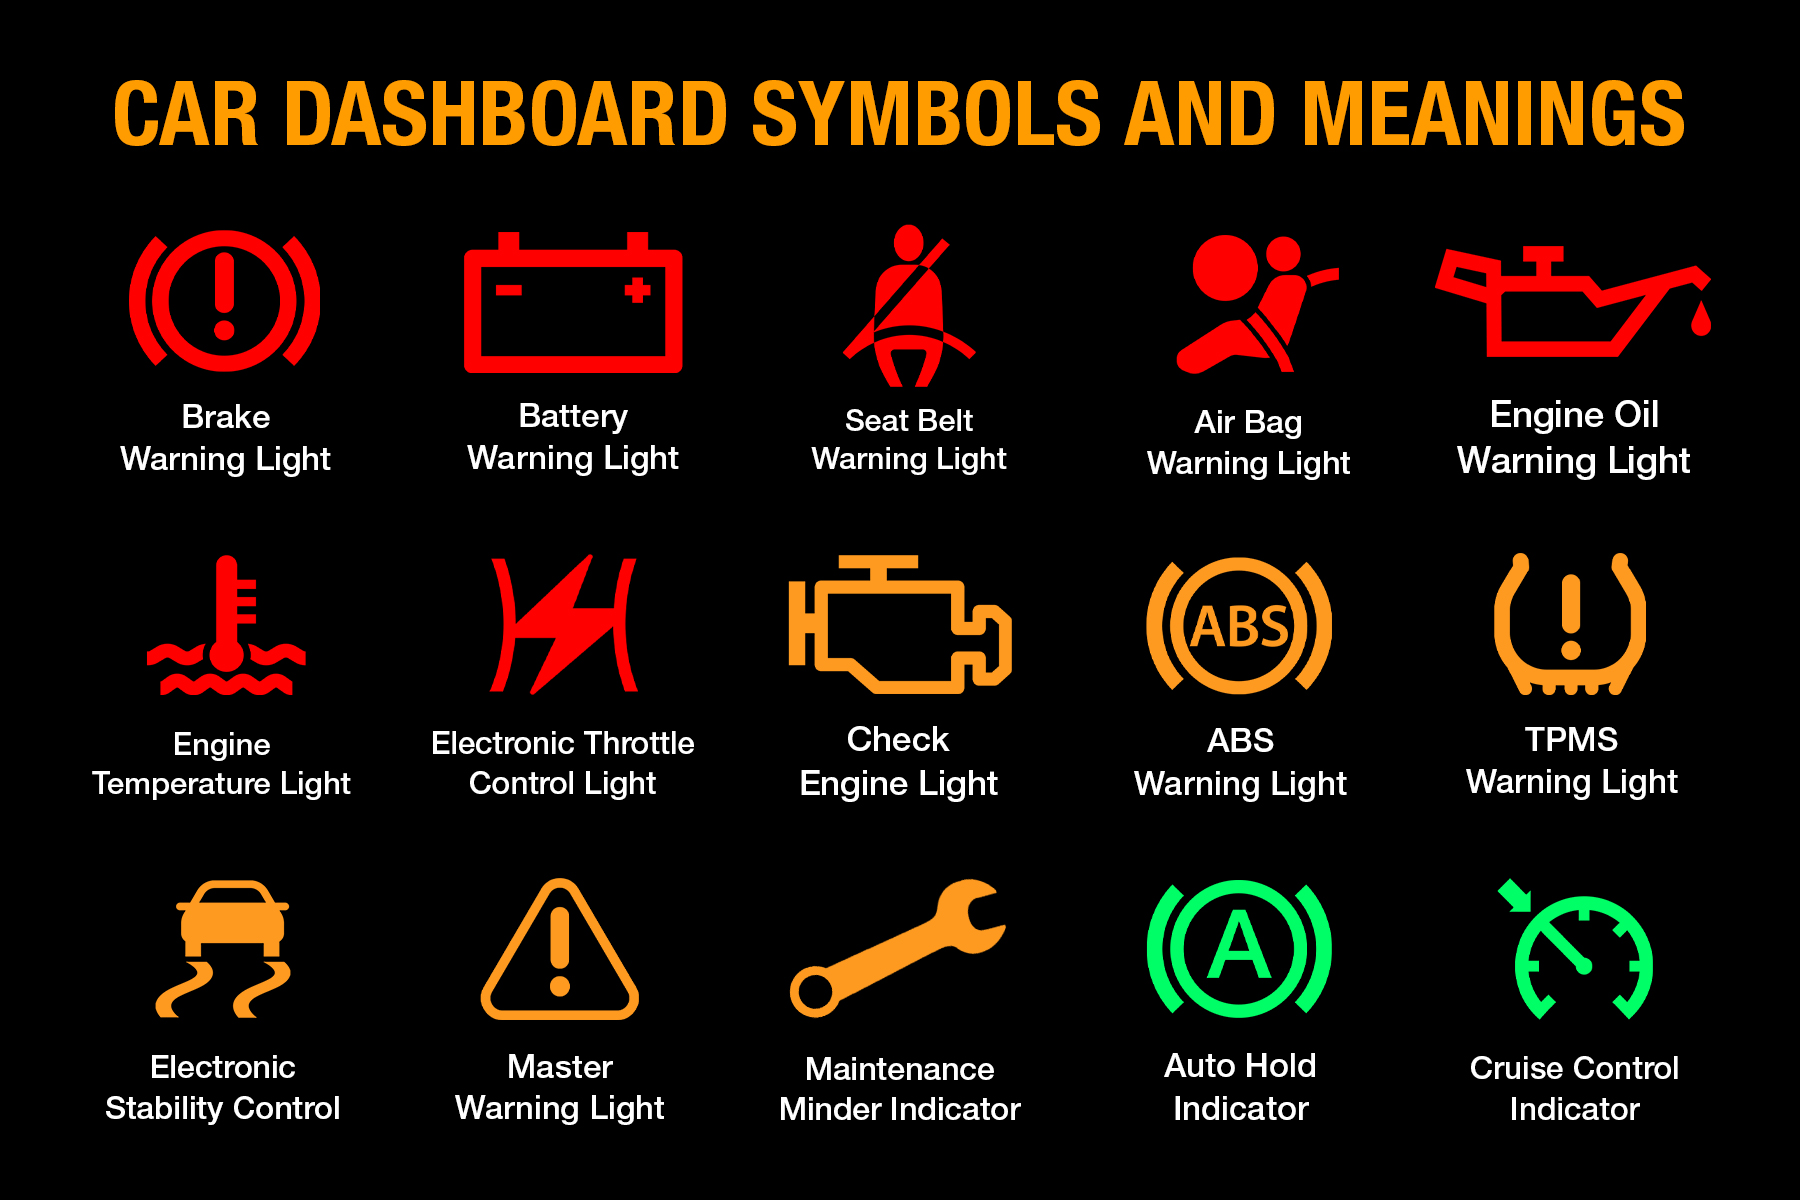 14 Car dashboard symbols and meanings demystified - Santander Consumer USA